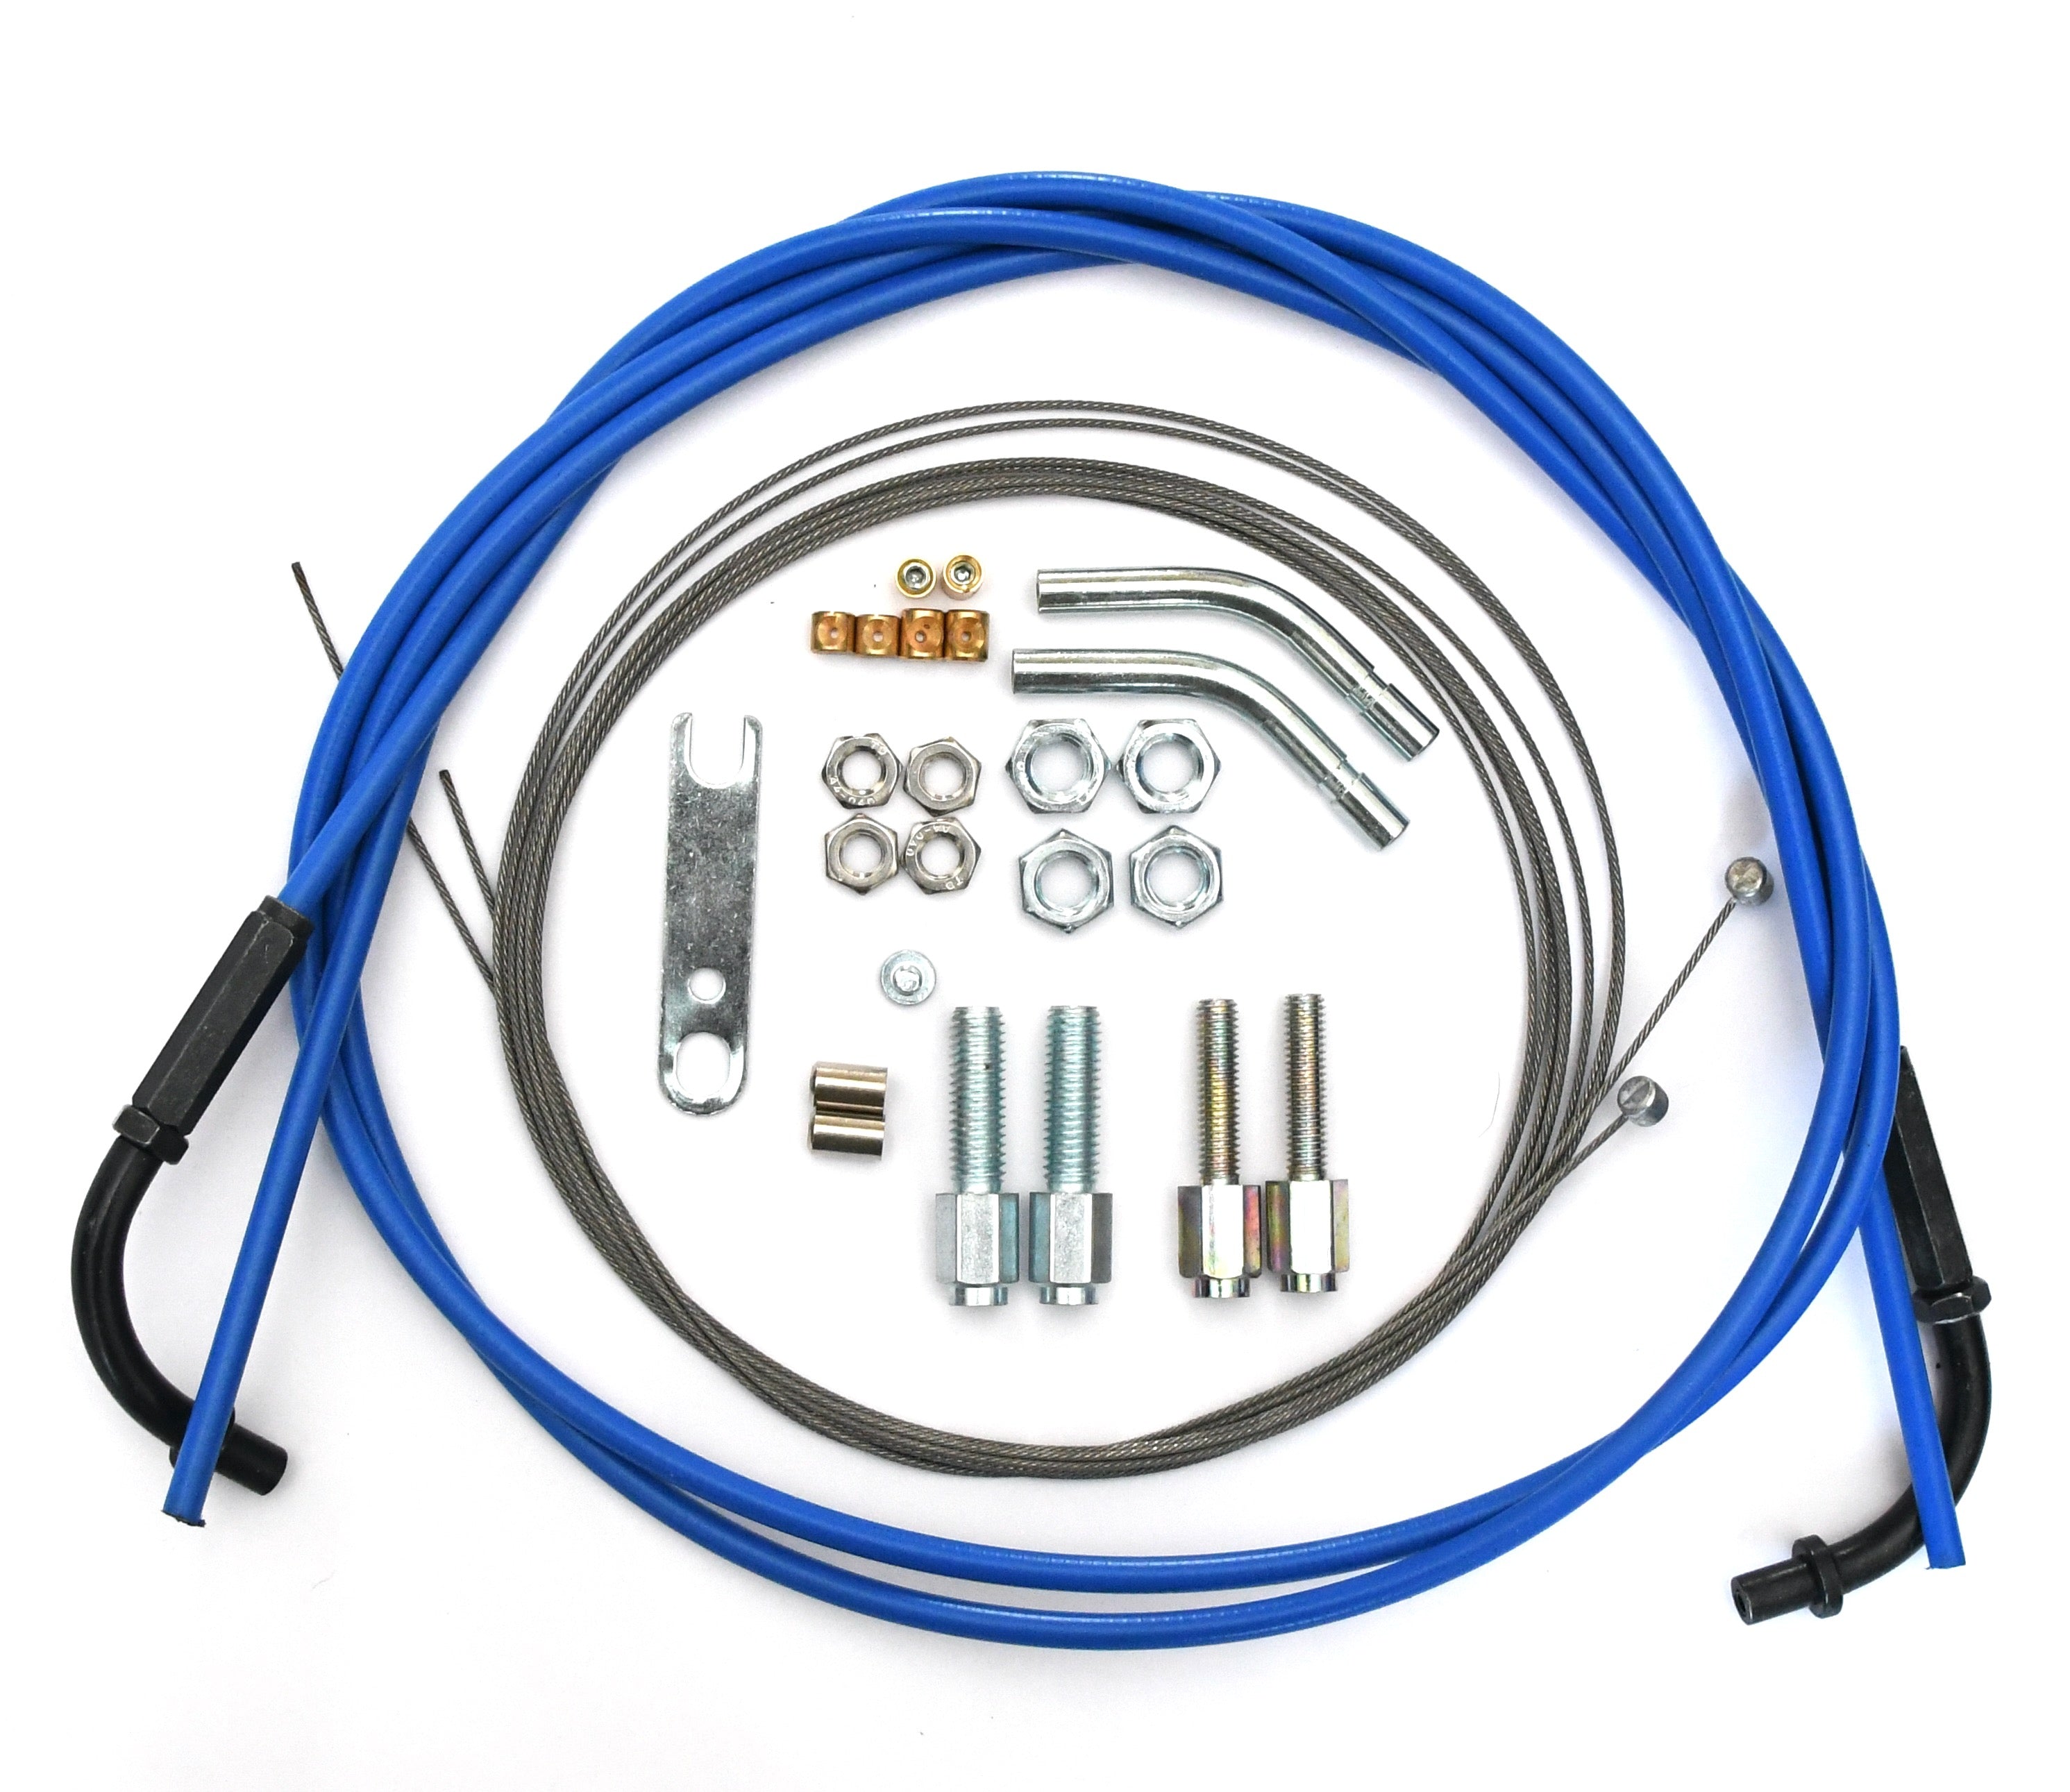 Add an XM2 Throttle Cable Kit and save upto £5